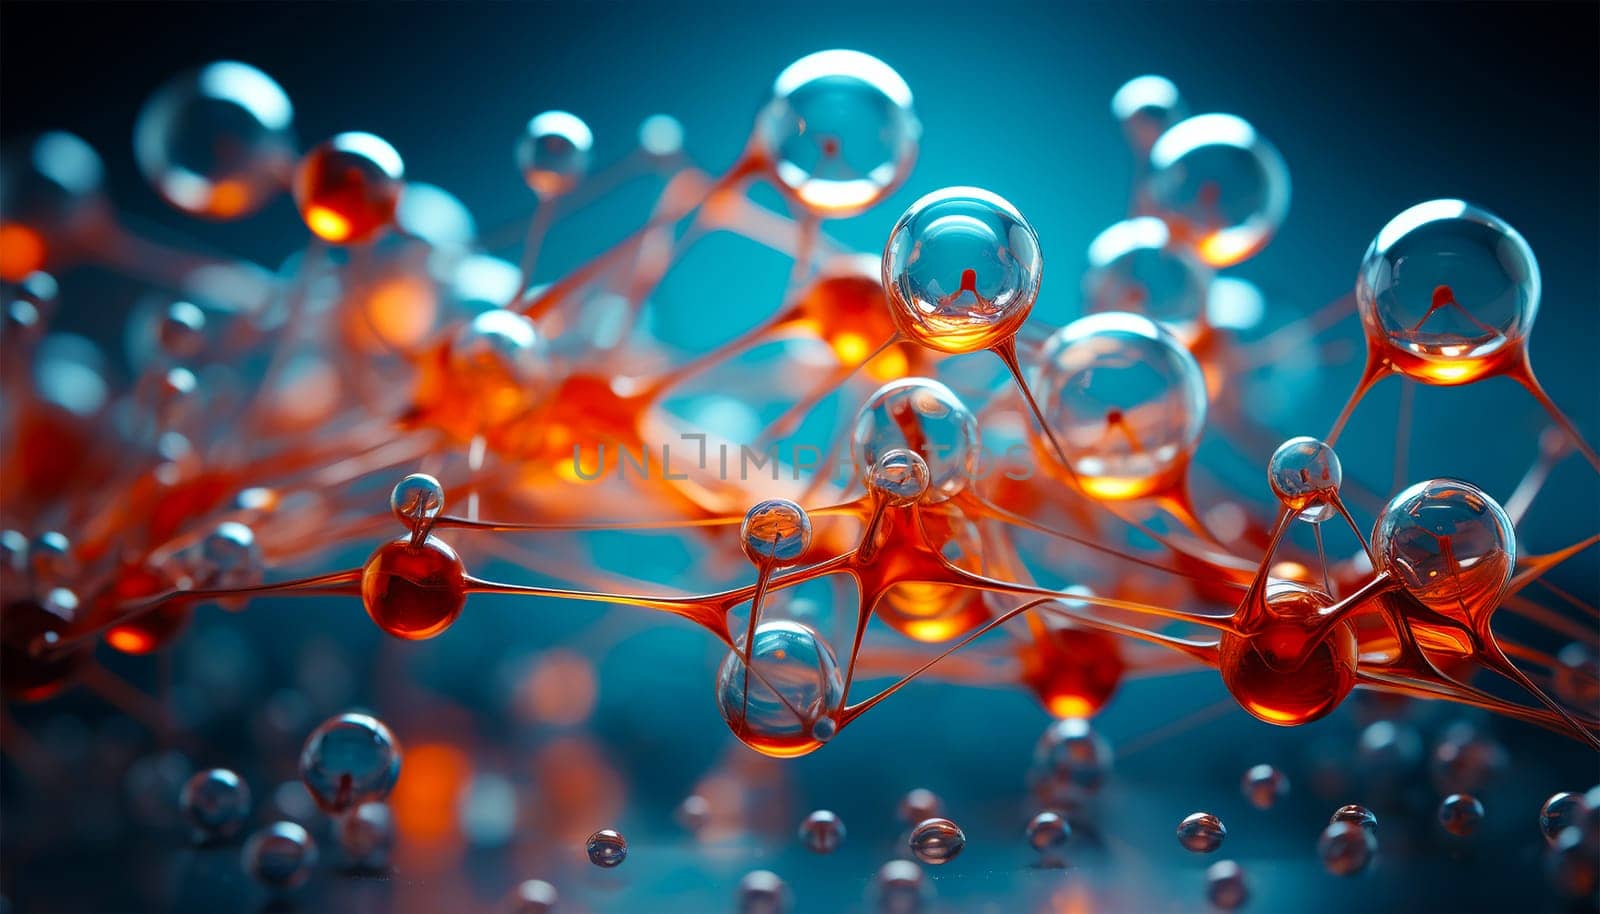 Science background with molecule or atom. molecule set, jojoba nano 3D cell, collagen bio abstract medical icon. Beauty science skin care molecular concept, natural bubble kit. colorful molecule atom illustration Copy space